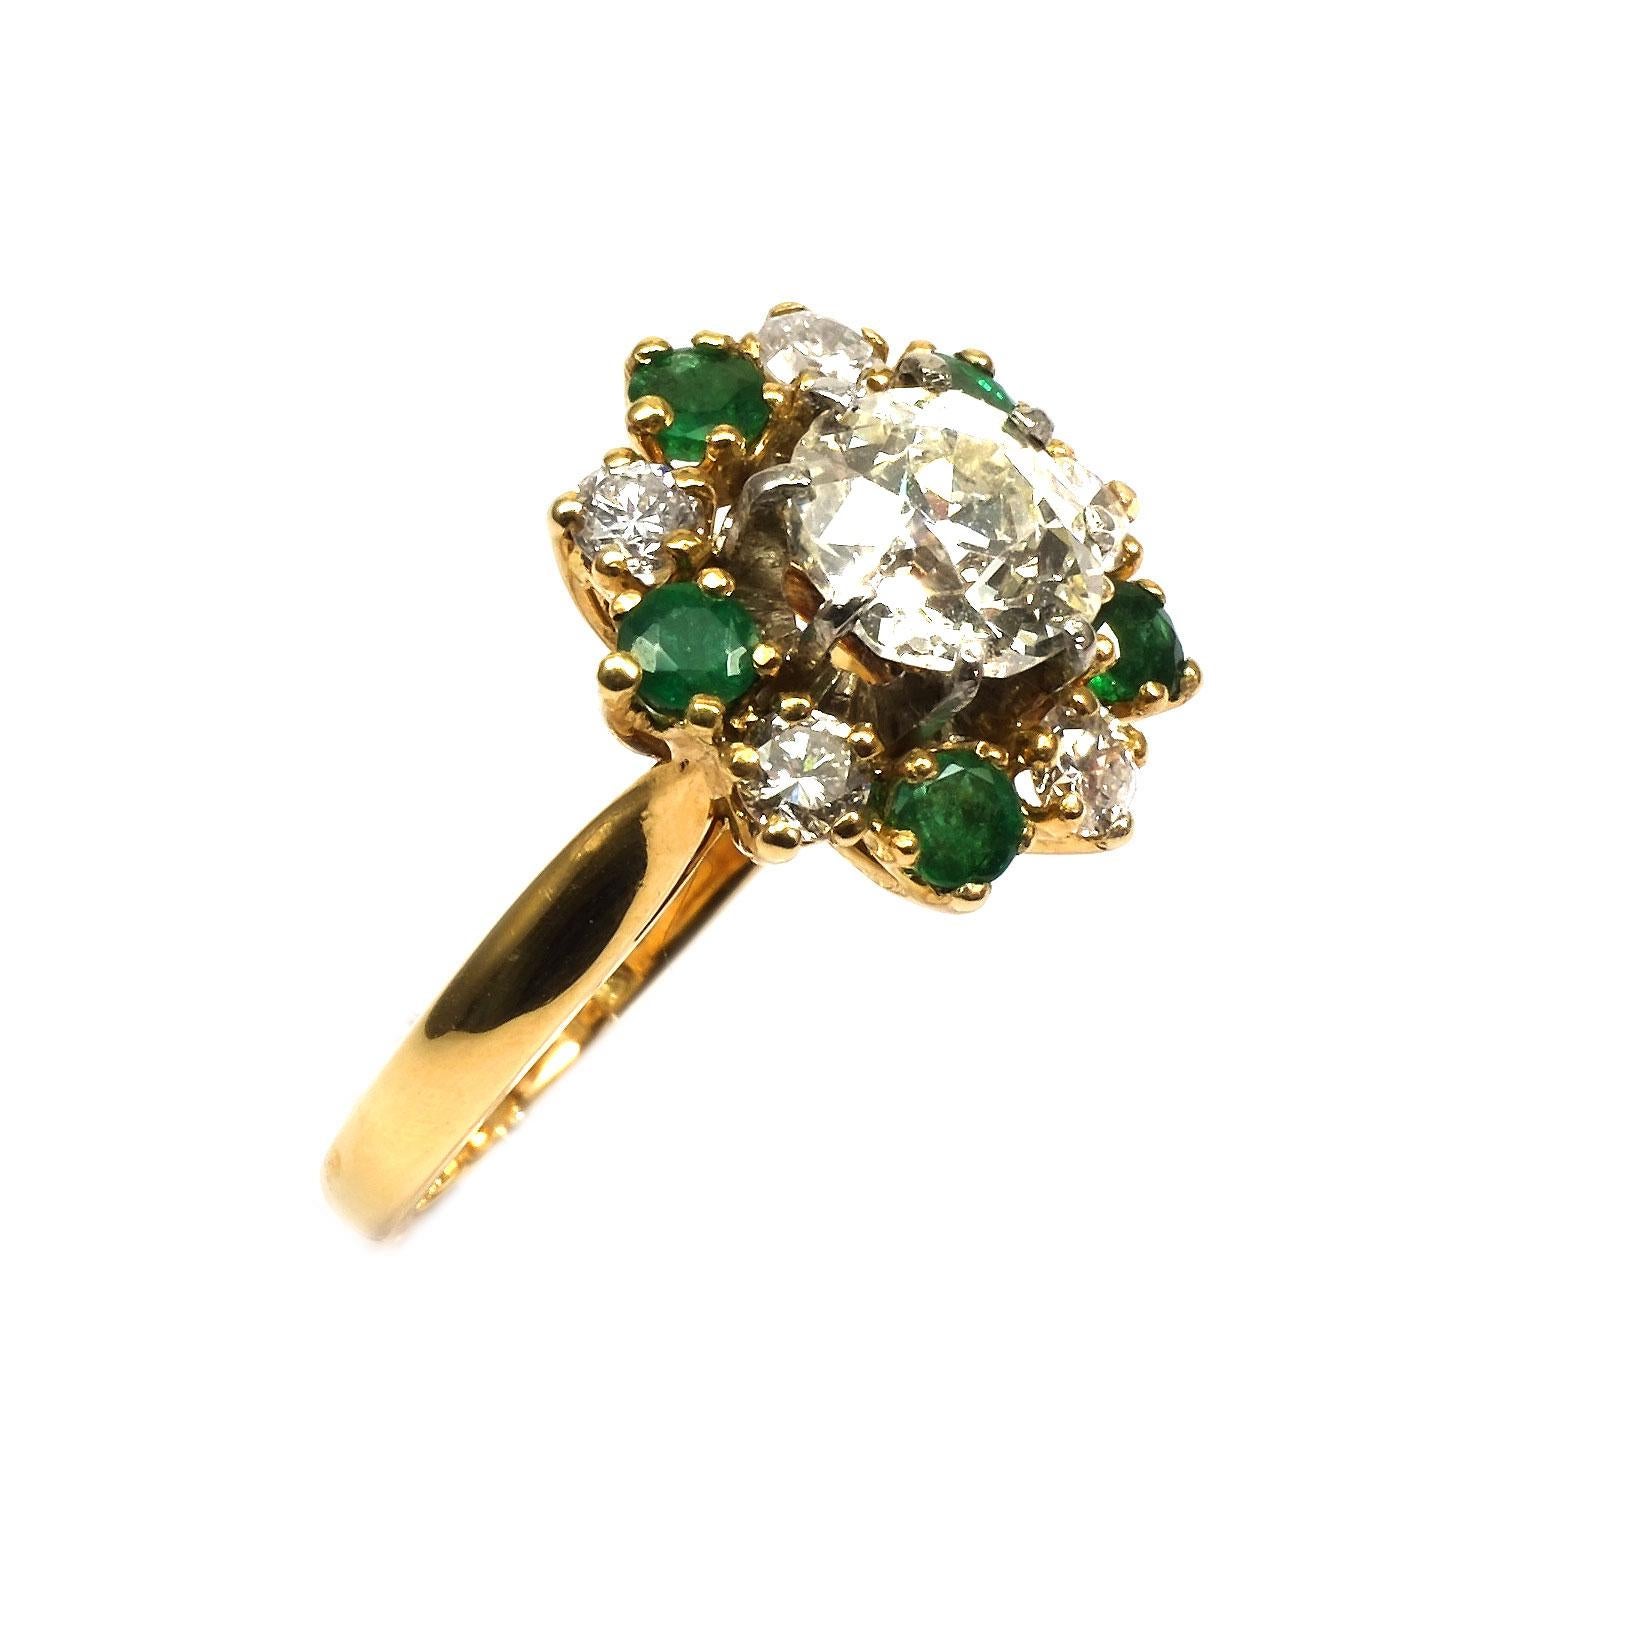 2.0 Carat Diamond and Emerald 18 K Yellow Gold Cluster Ring Paris circa 1930

Decorative diamond ring with a flower-shaped ring head, set with an old European-cut diamond of 1.55 ct in an entourage of emeralds and 5 brilliant-cut diamonds totaling